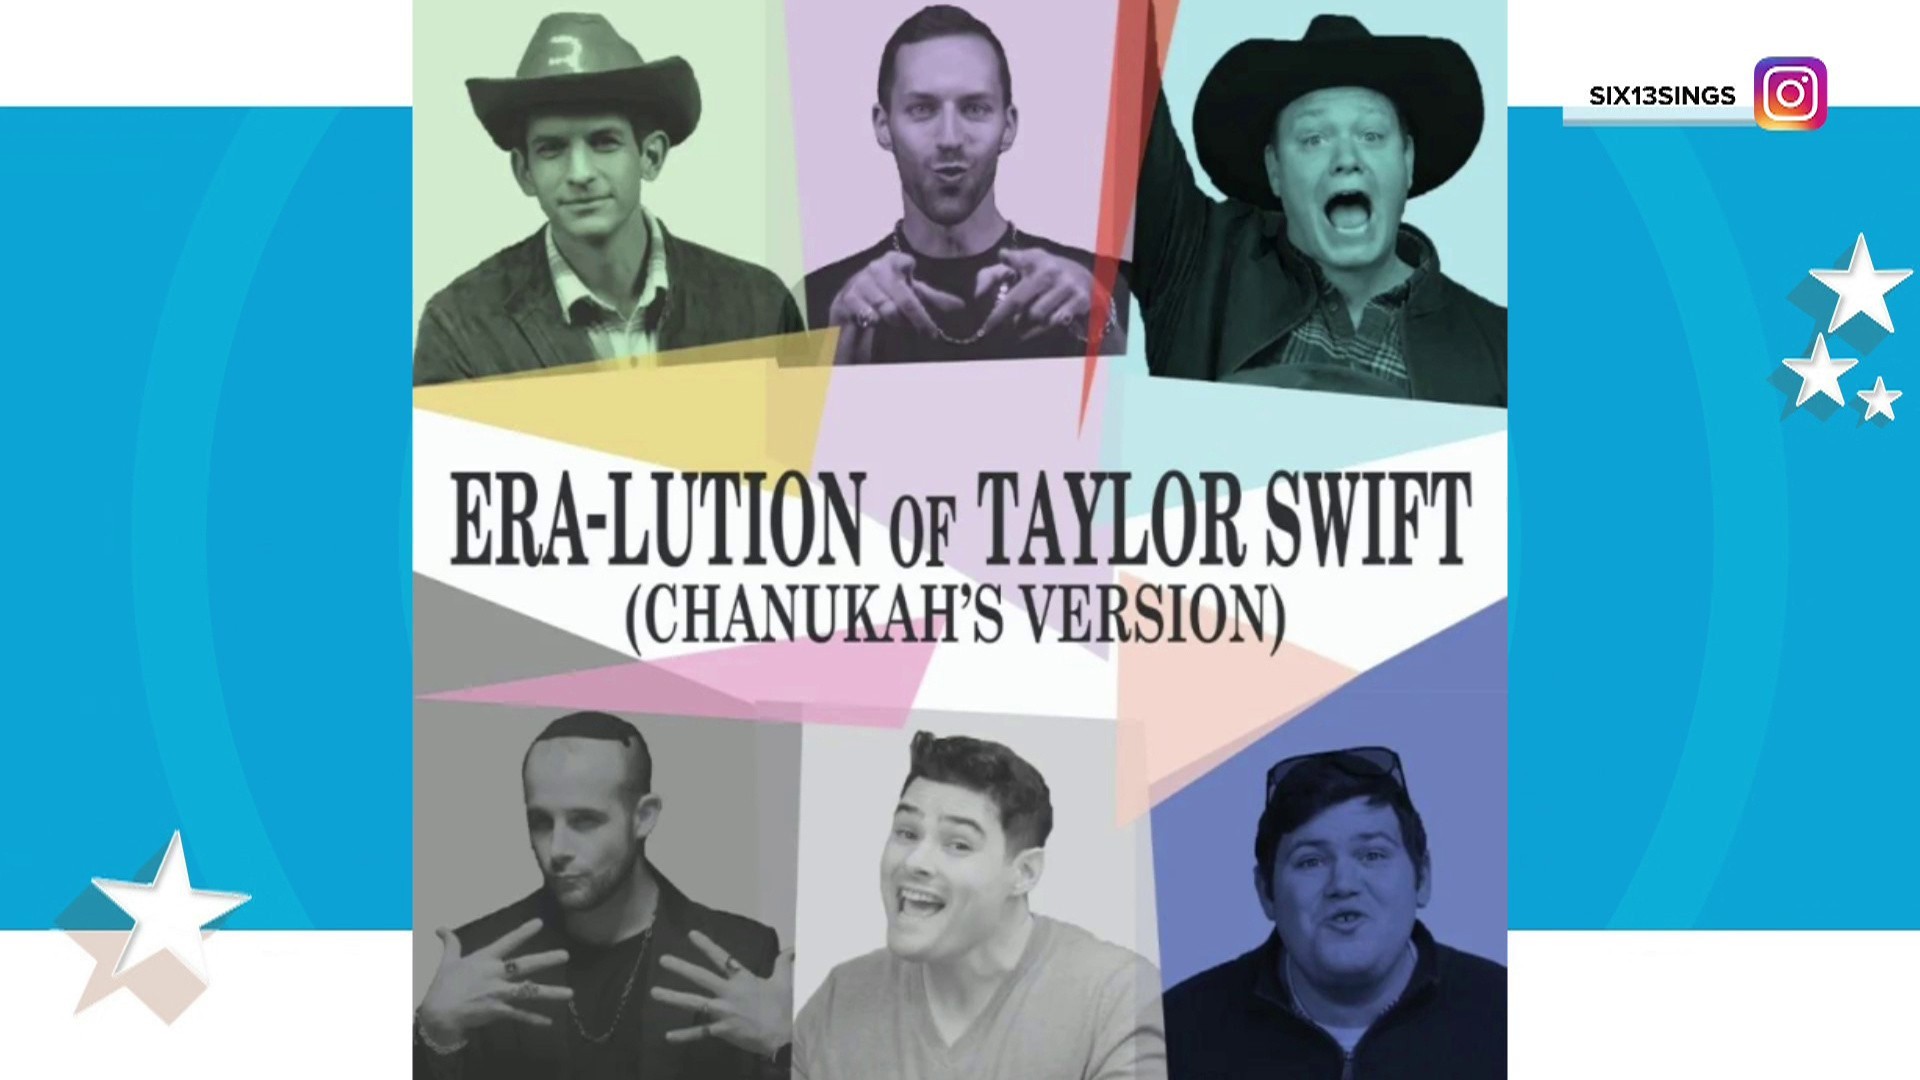 Jewish a Capella group Six13 releases remixed Taylor Swift hits